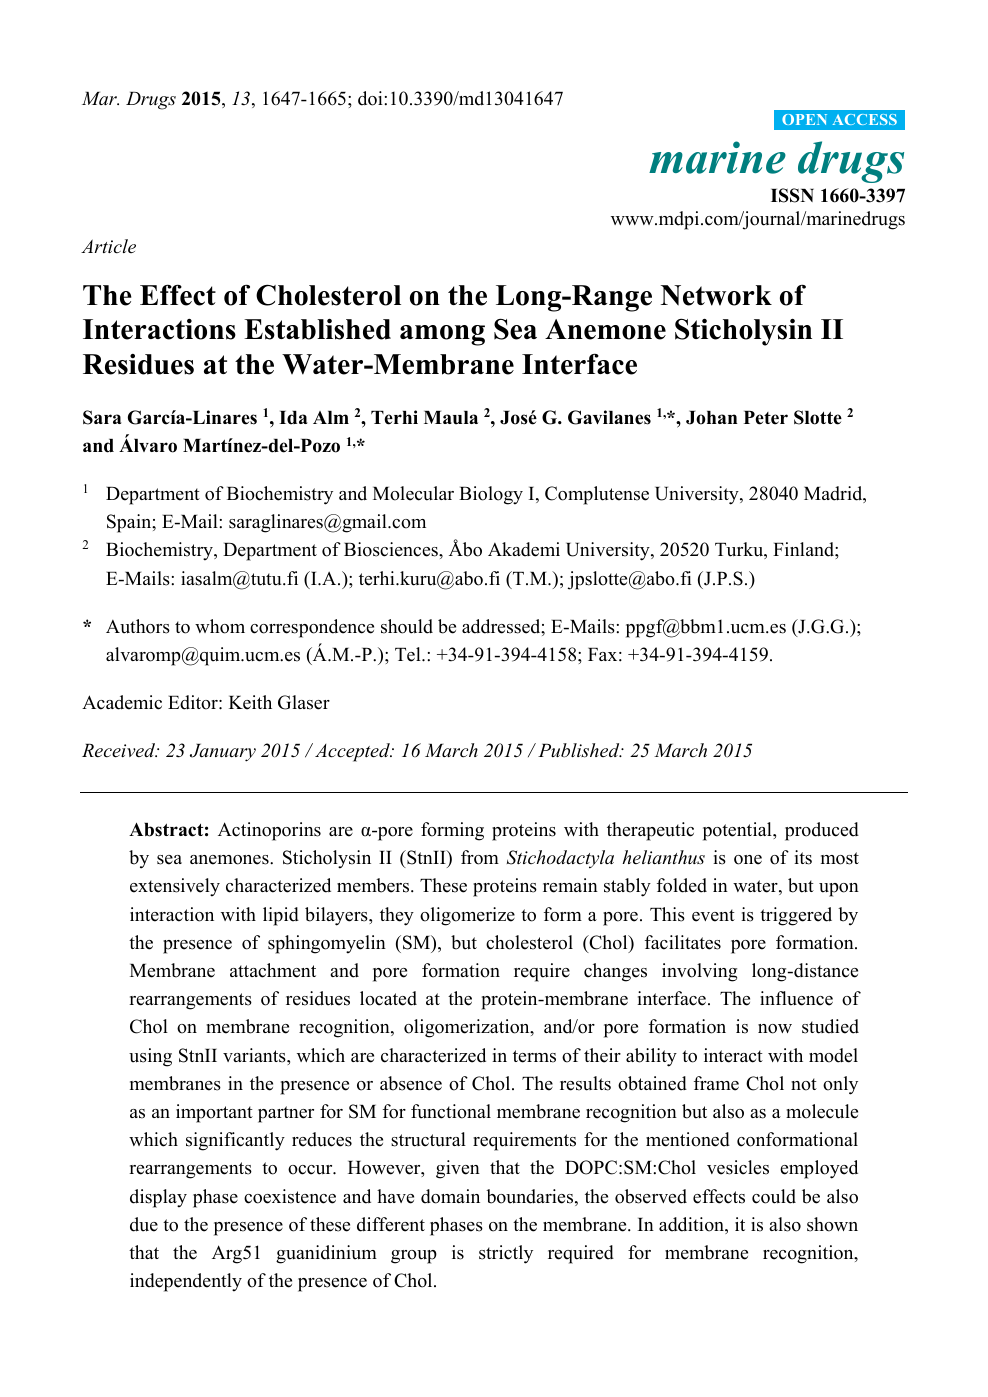 The Effect Of Cholesterol On The Long Range Network Of Interactions Established Among Sea Anemone Sticholysin Ii Residues At The Water Membrane Interface Topic Of Research Paper In Biological Sciences Download Scholarly Article